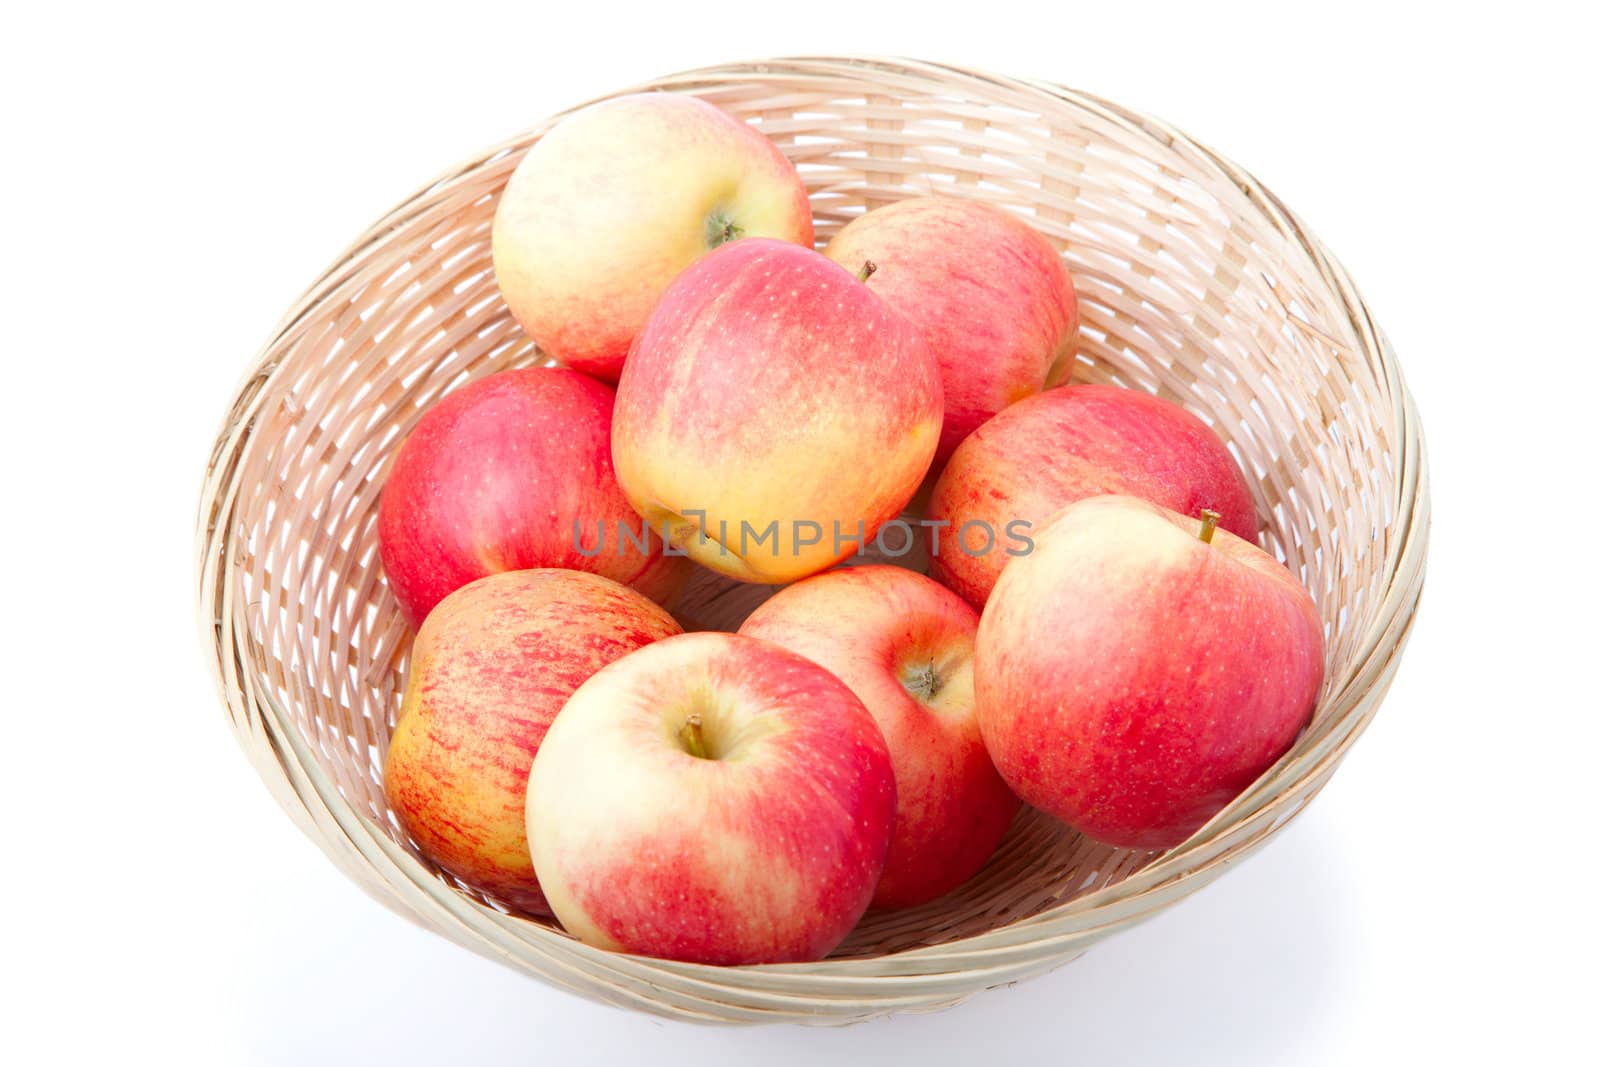 Basket of apples isolated on a white background  by motorolka